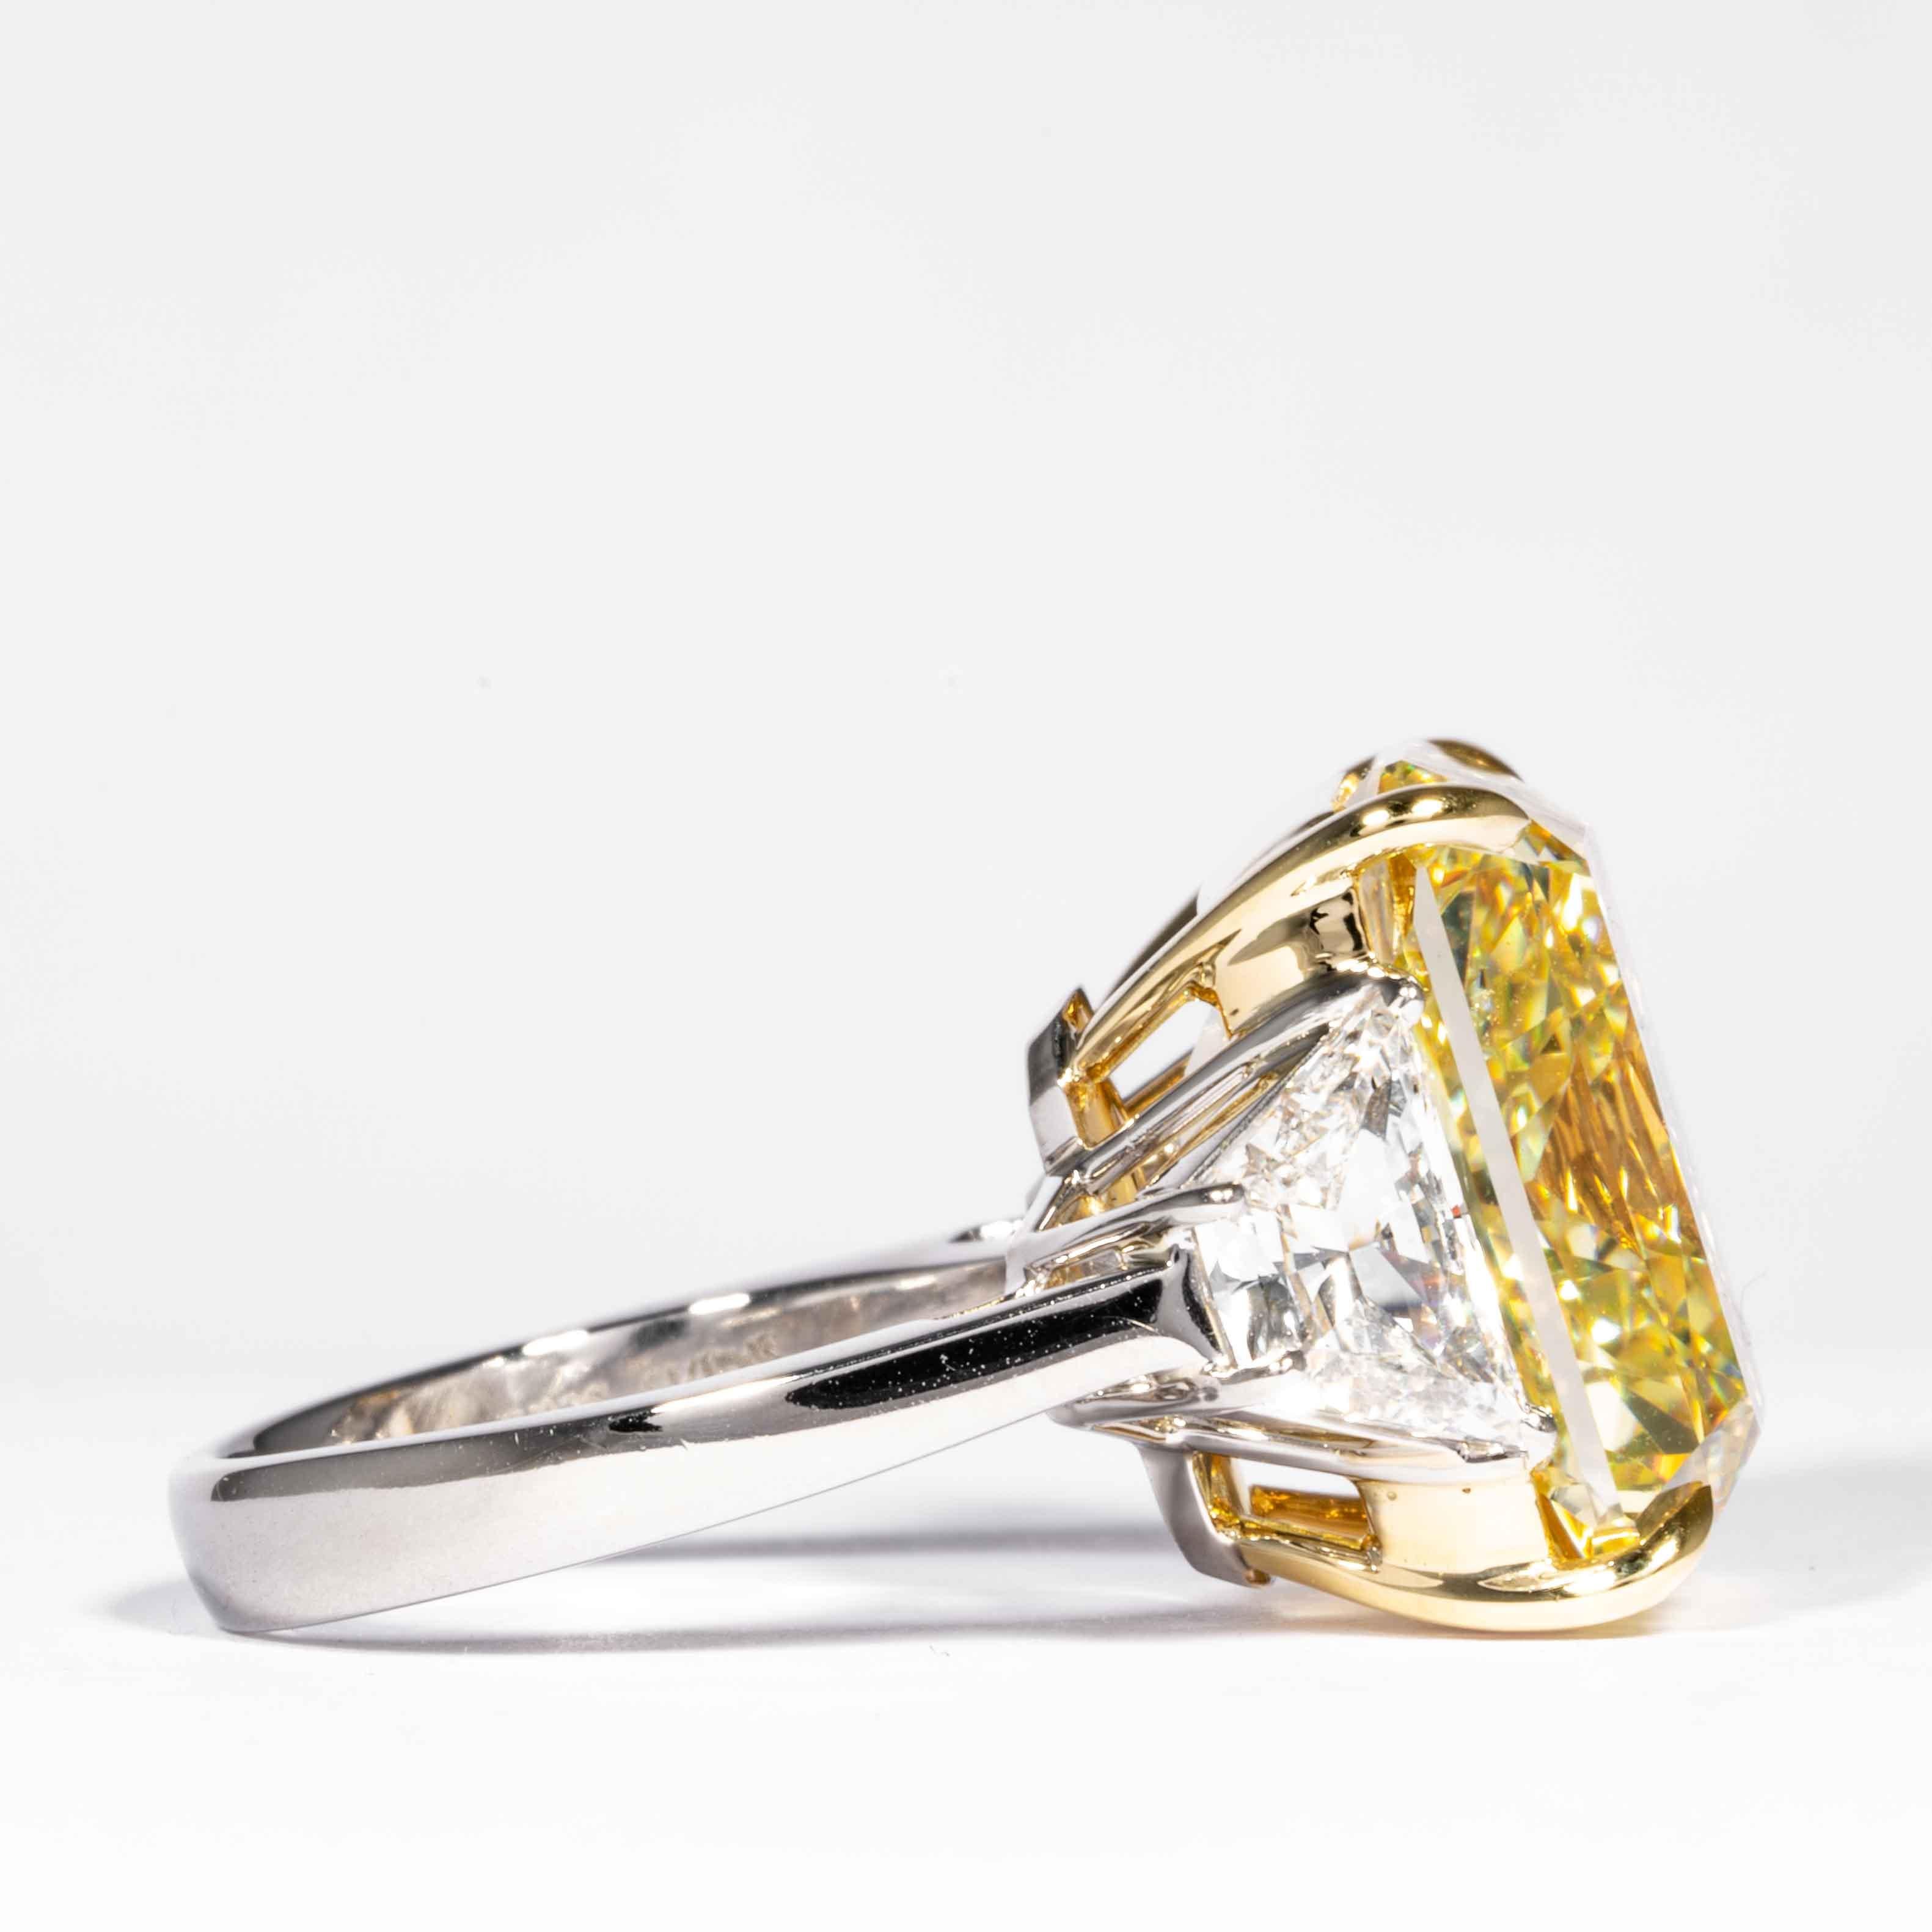 Radiant Cut Shreve, Crump & Low GIA Certified 20.24 Carat Fancy Intense Yellow Diamond Ring For Sale